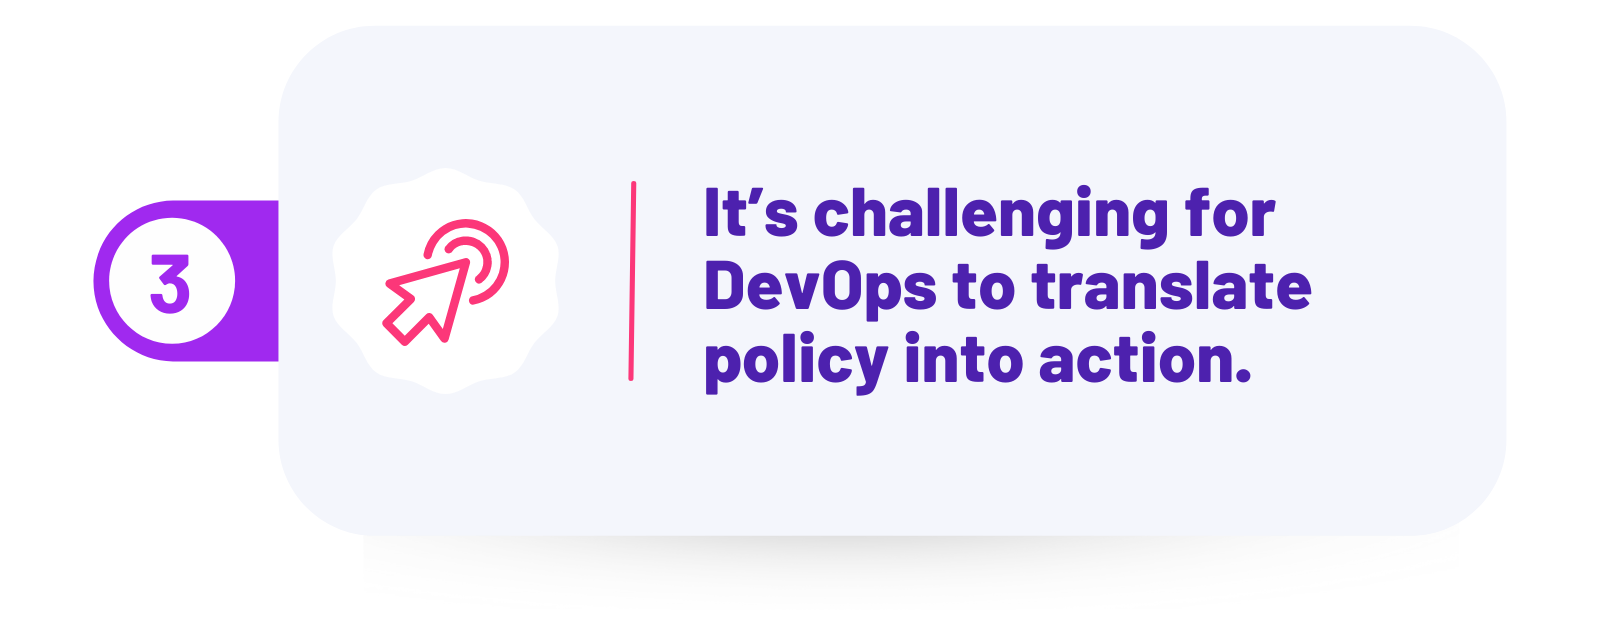 It's challenging for DevOps to translate policy into action